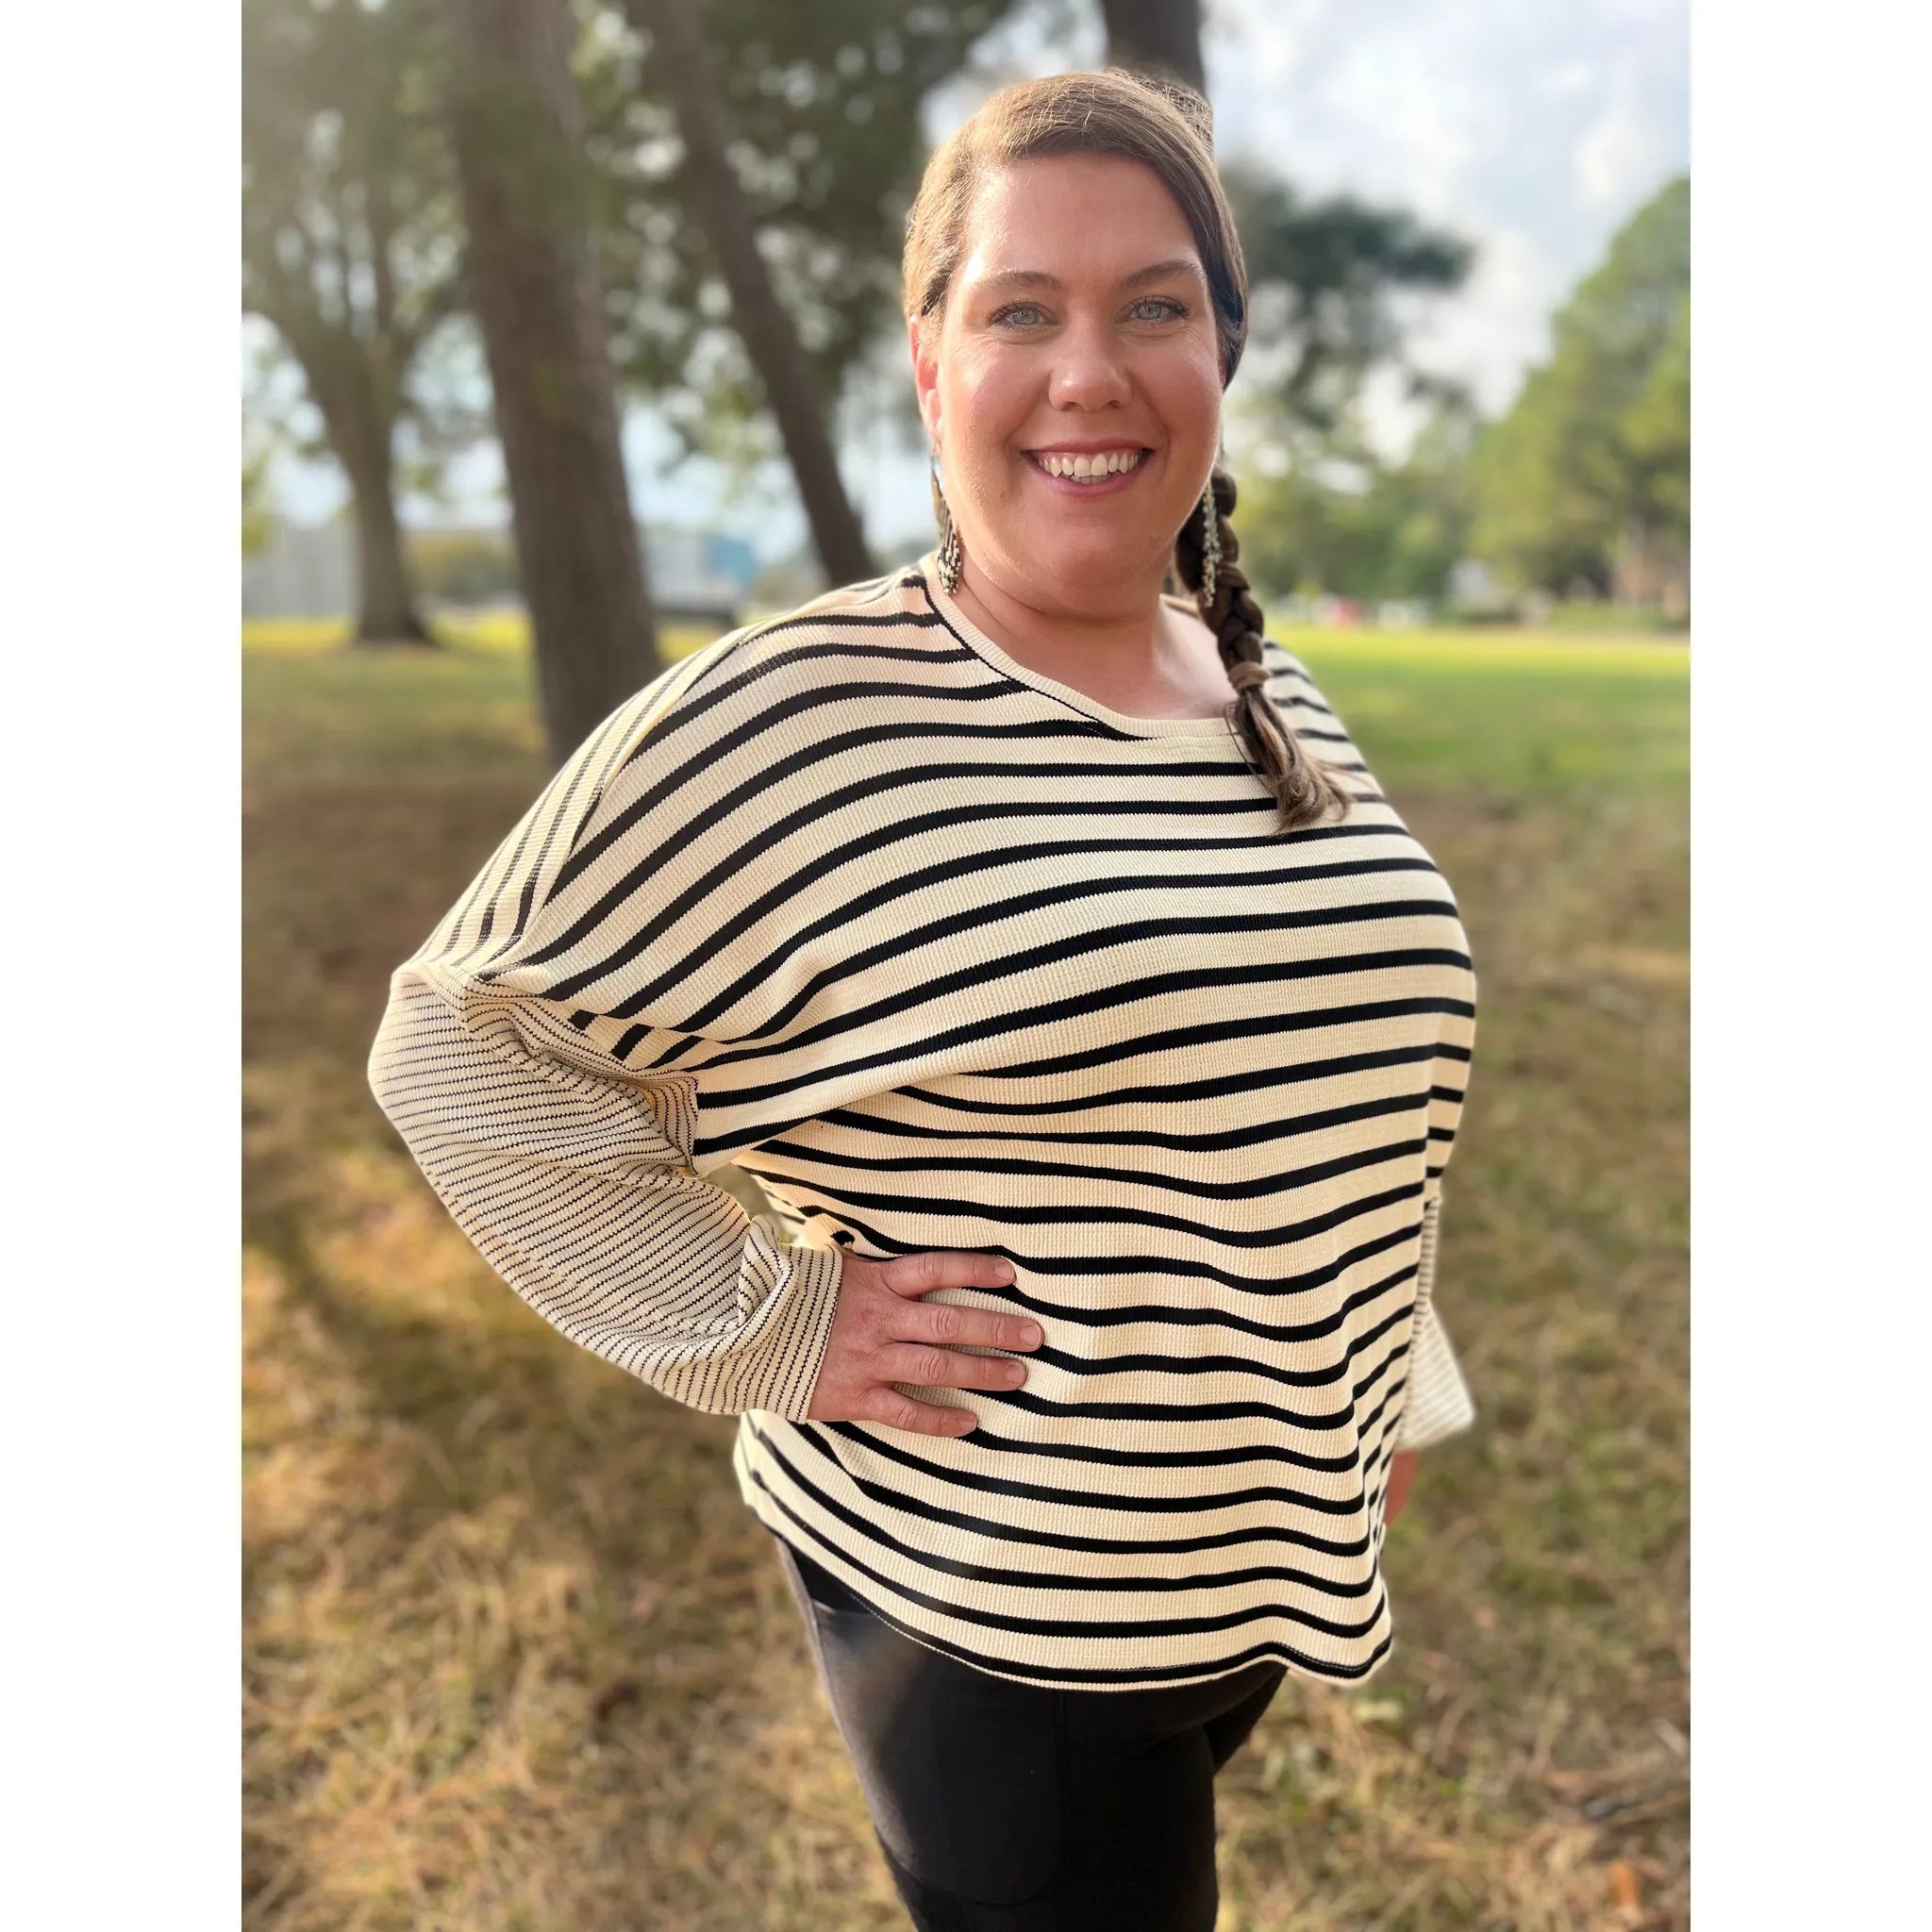 Look chic and fashionable with the Marla Top! This striped top features long, balloon sleeves for a flattering fit that will turn heads. The Marla Top is perfect for day-to-night style that is always on trend. What are you waiting for? Embrace the look now!  Zoe is wearing a size 2xl.